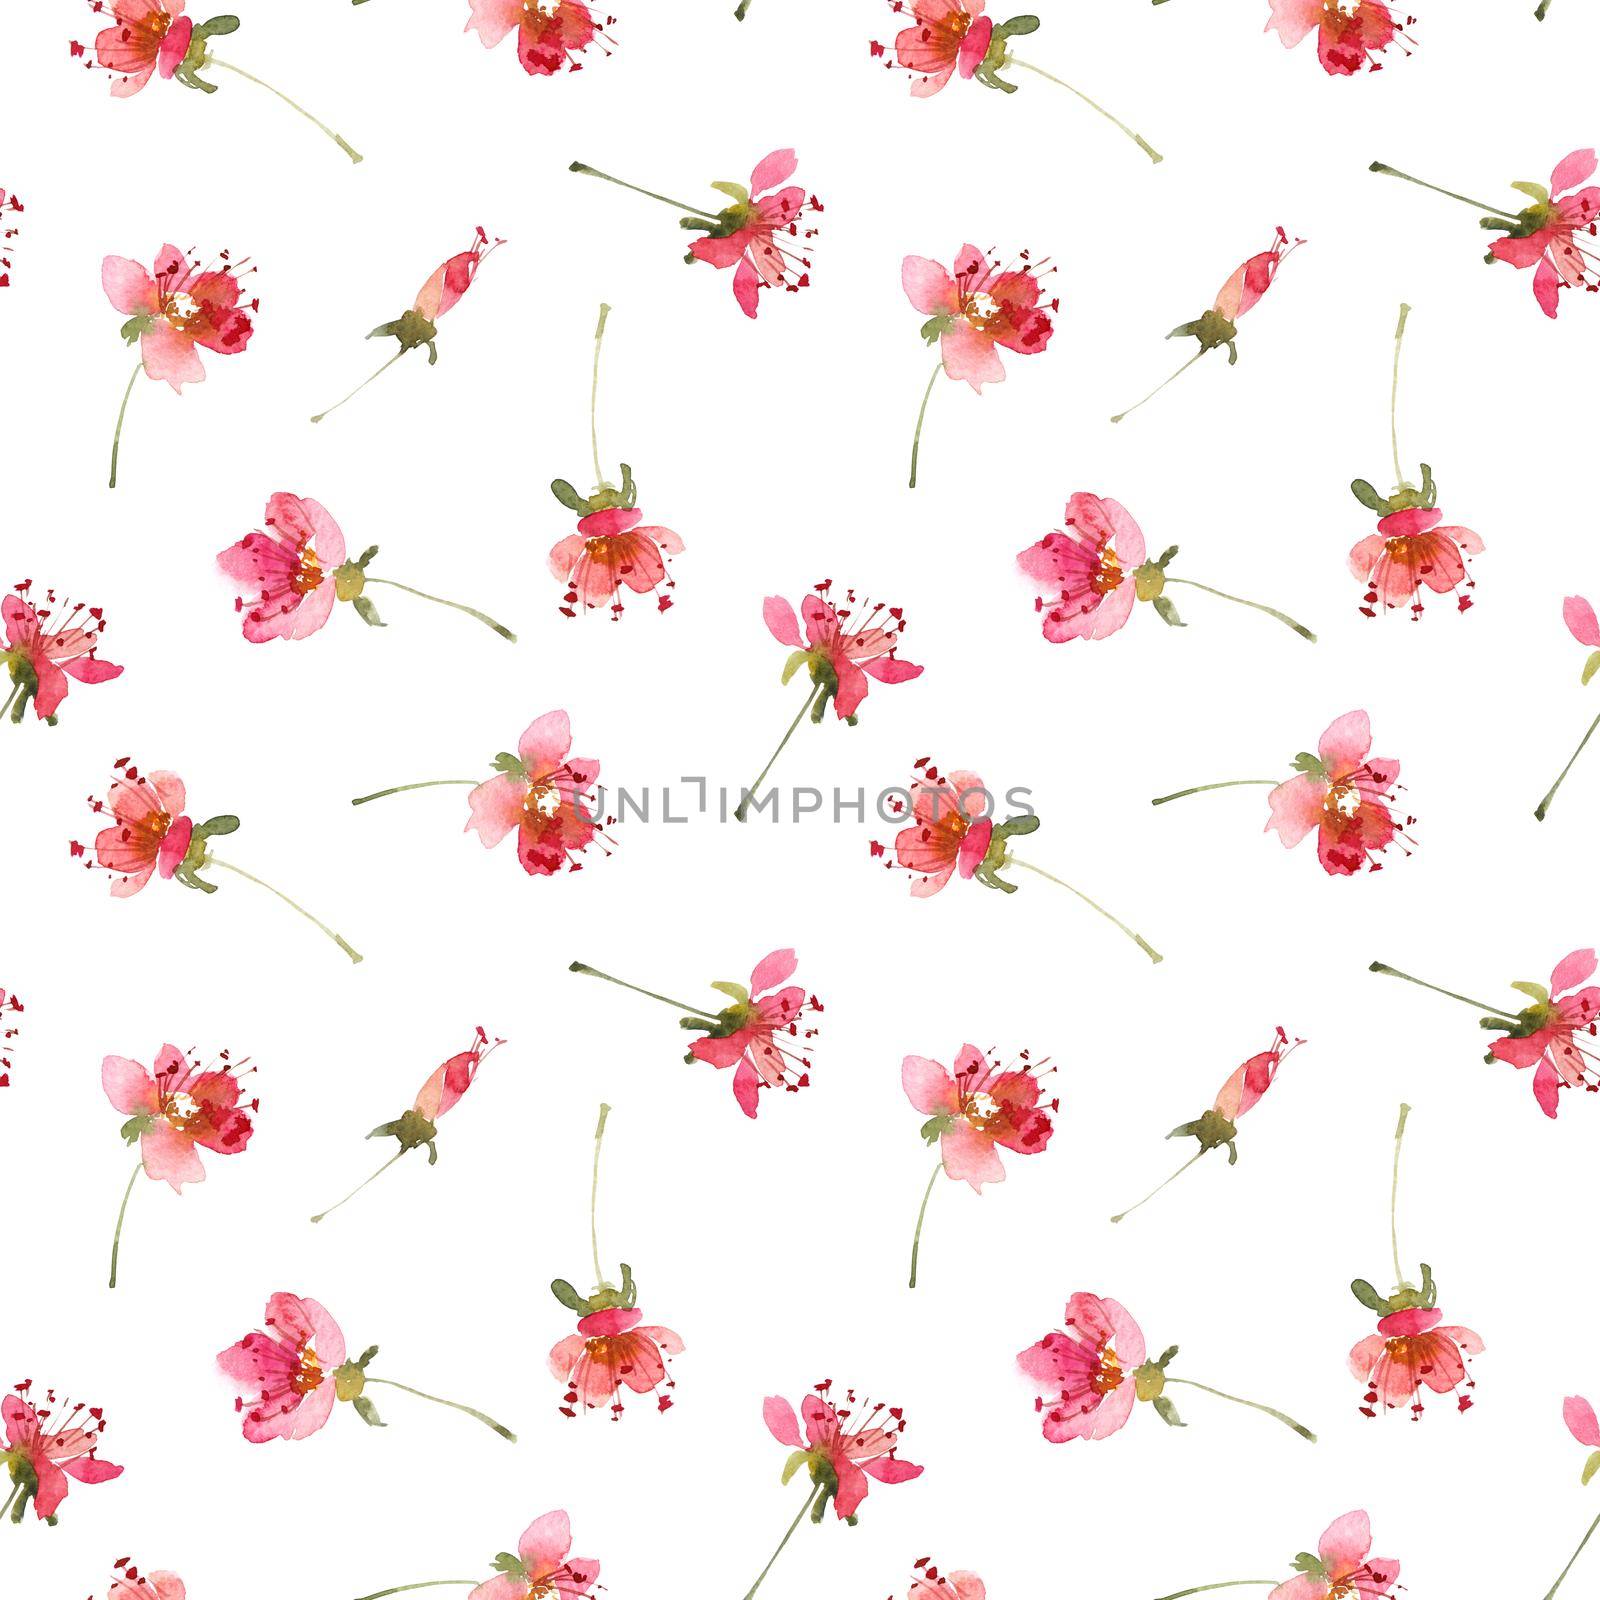 Watercolor seamless pattern with pink flowers